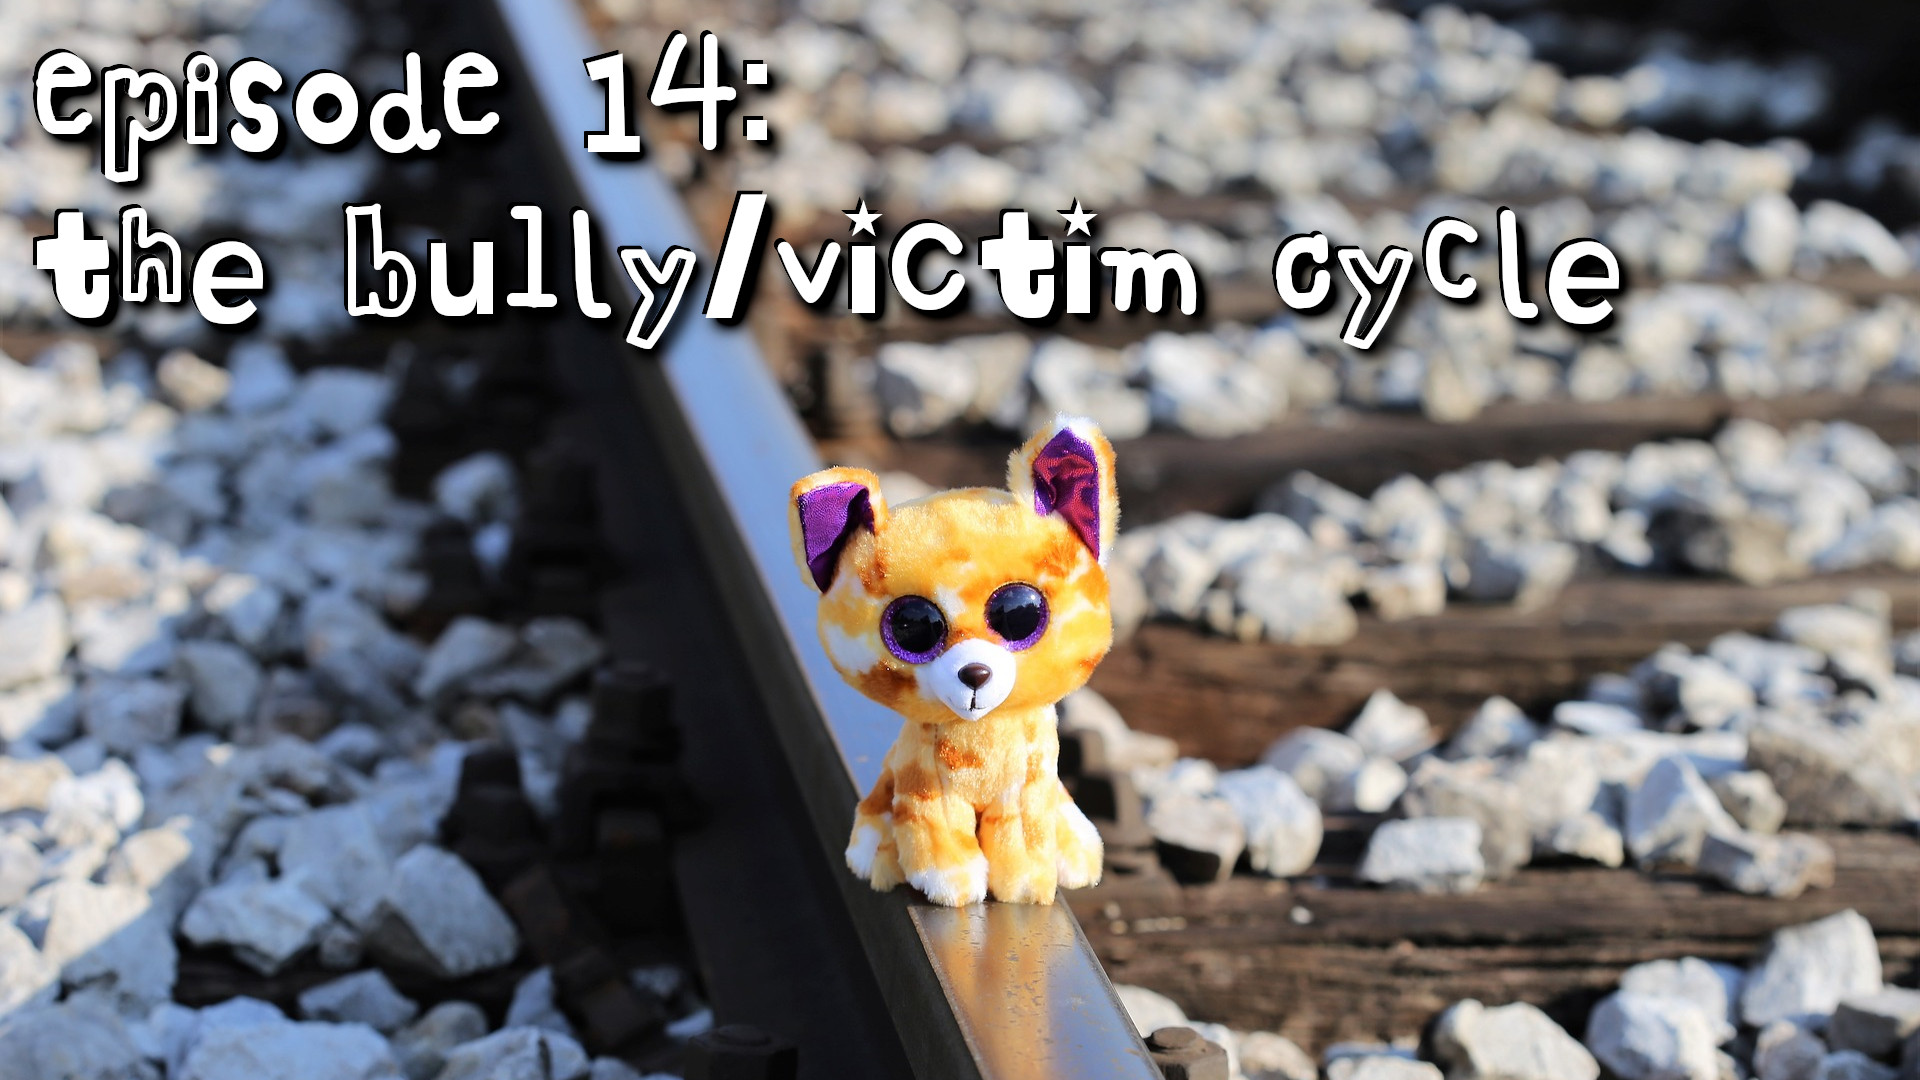 Episode 14: The Bully/Victim Cycle